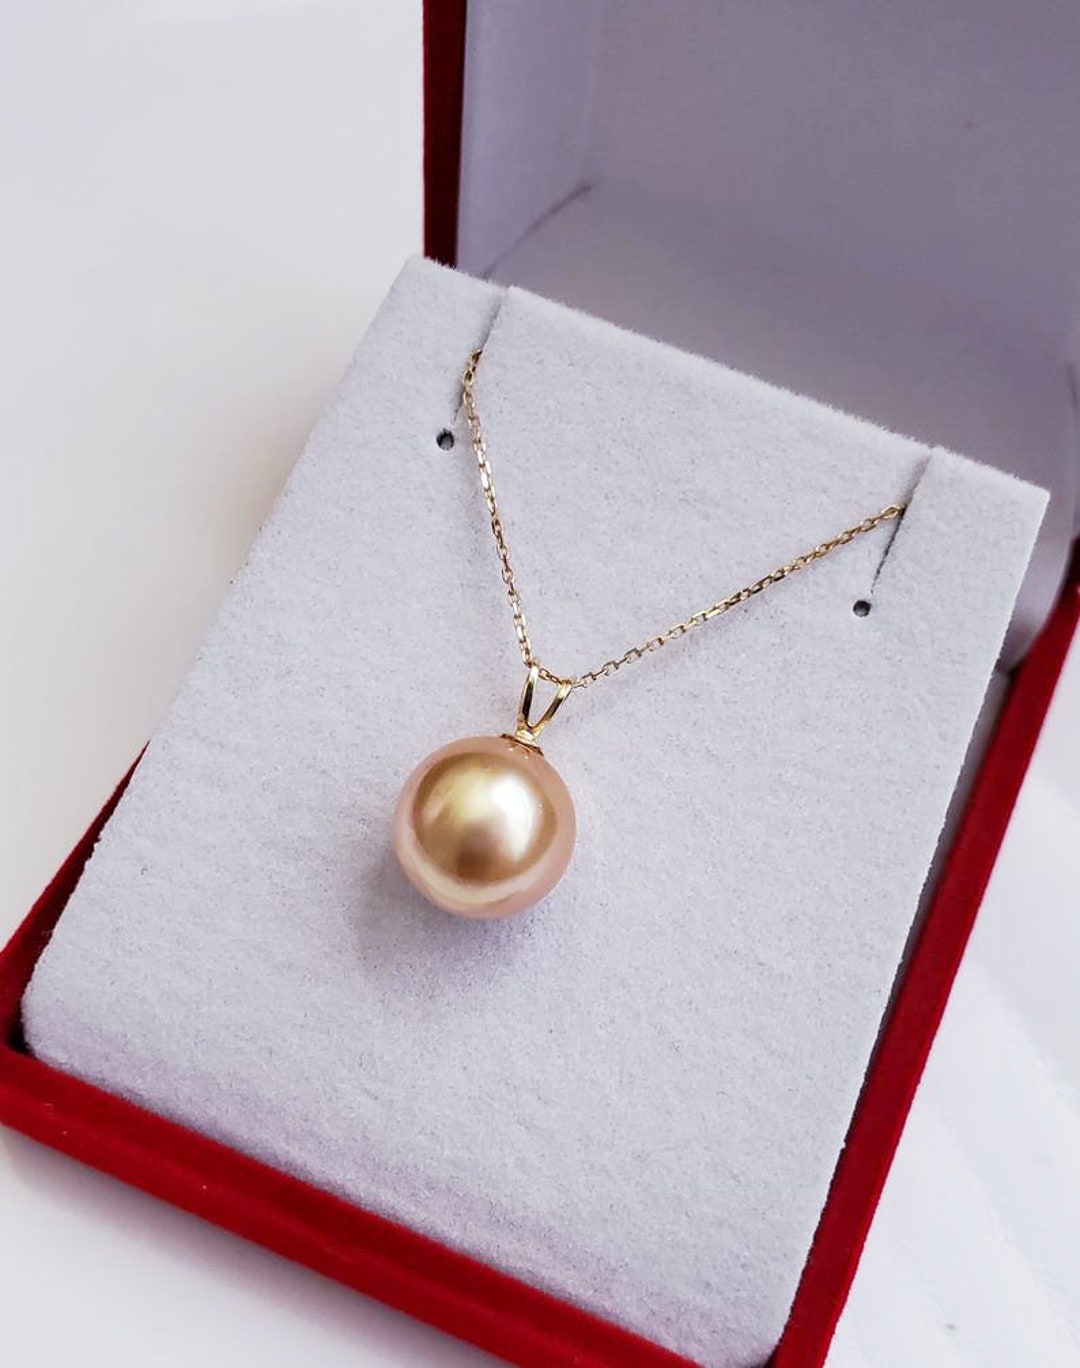 Southsea Golden Pearl Necklace Perfect Round 11-12mm 18kt - Etsy